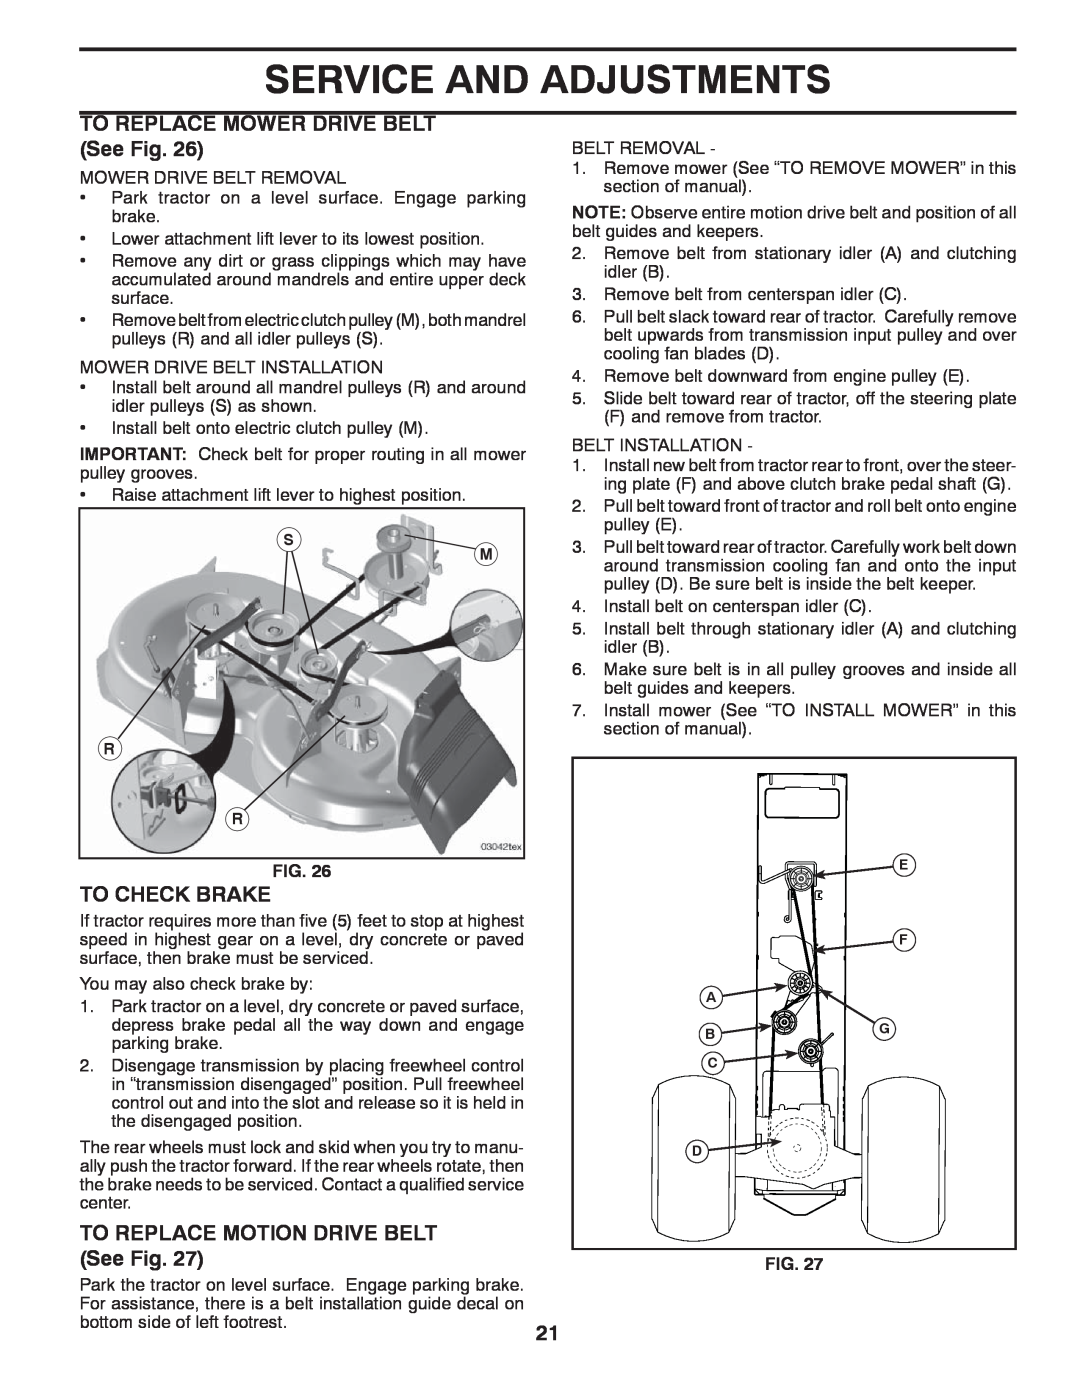 Poulan 96042006800 manual TO REPLACE MOWER DRIVE BELT See Fig, To Check Brake, TO REPLACE MOTION DRIVE BELT See Fig, S R R 